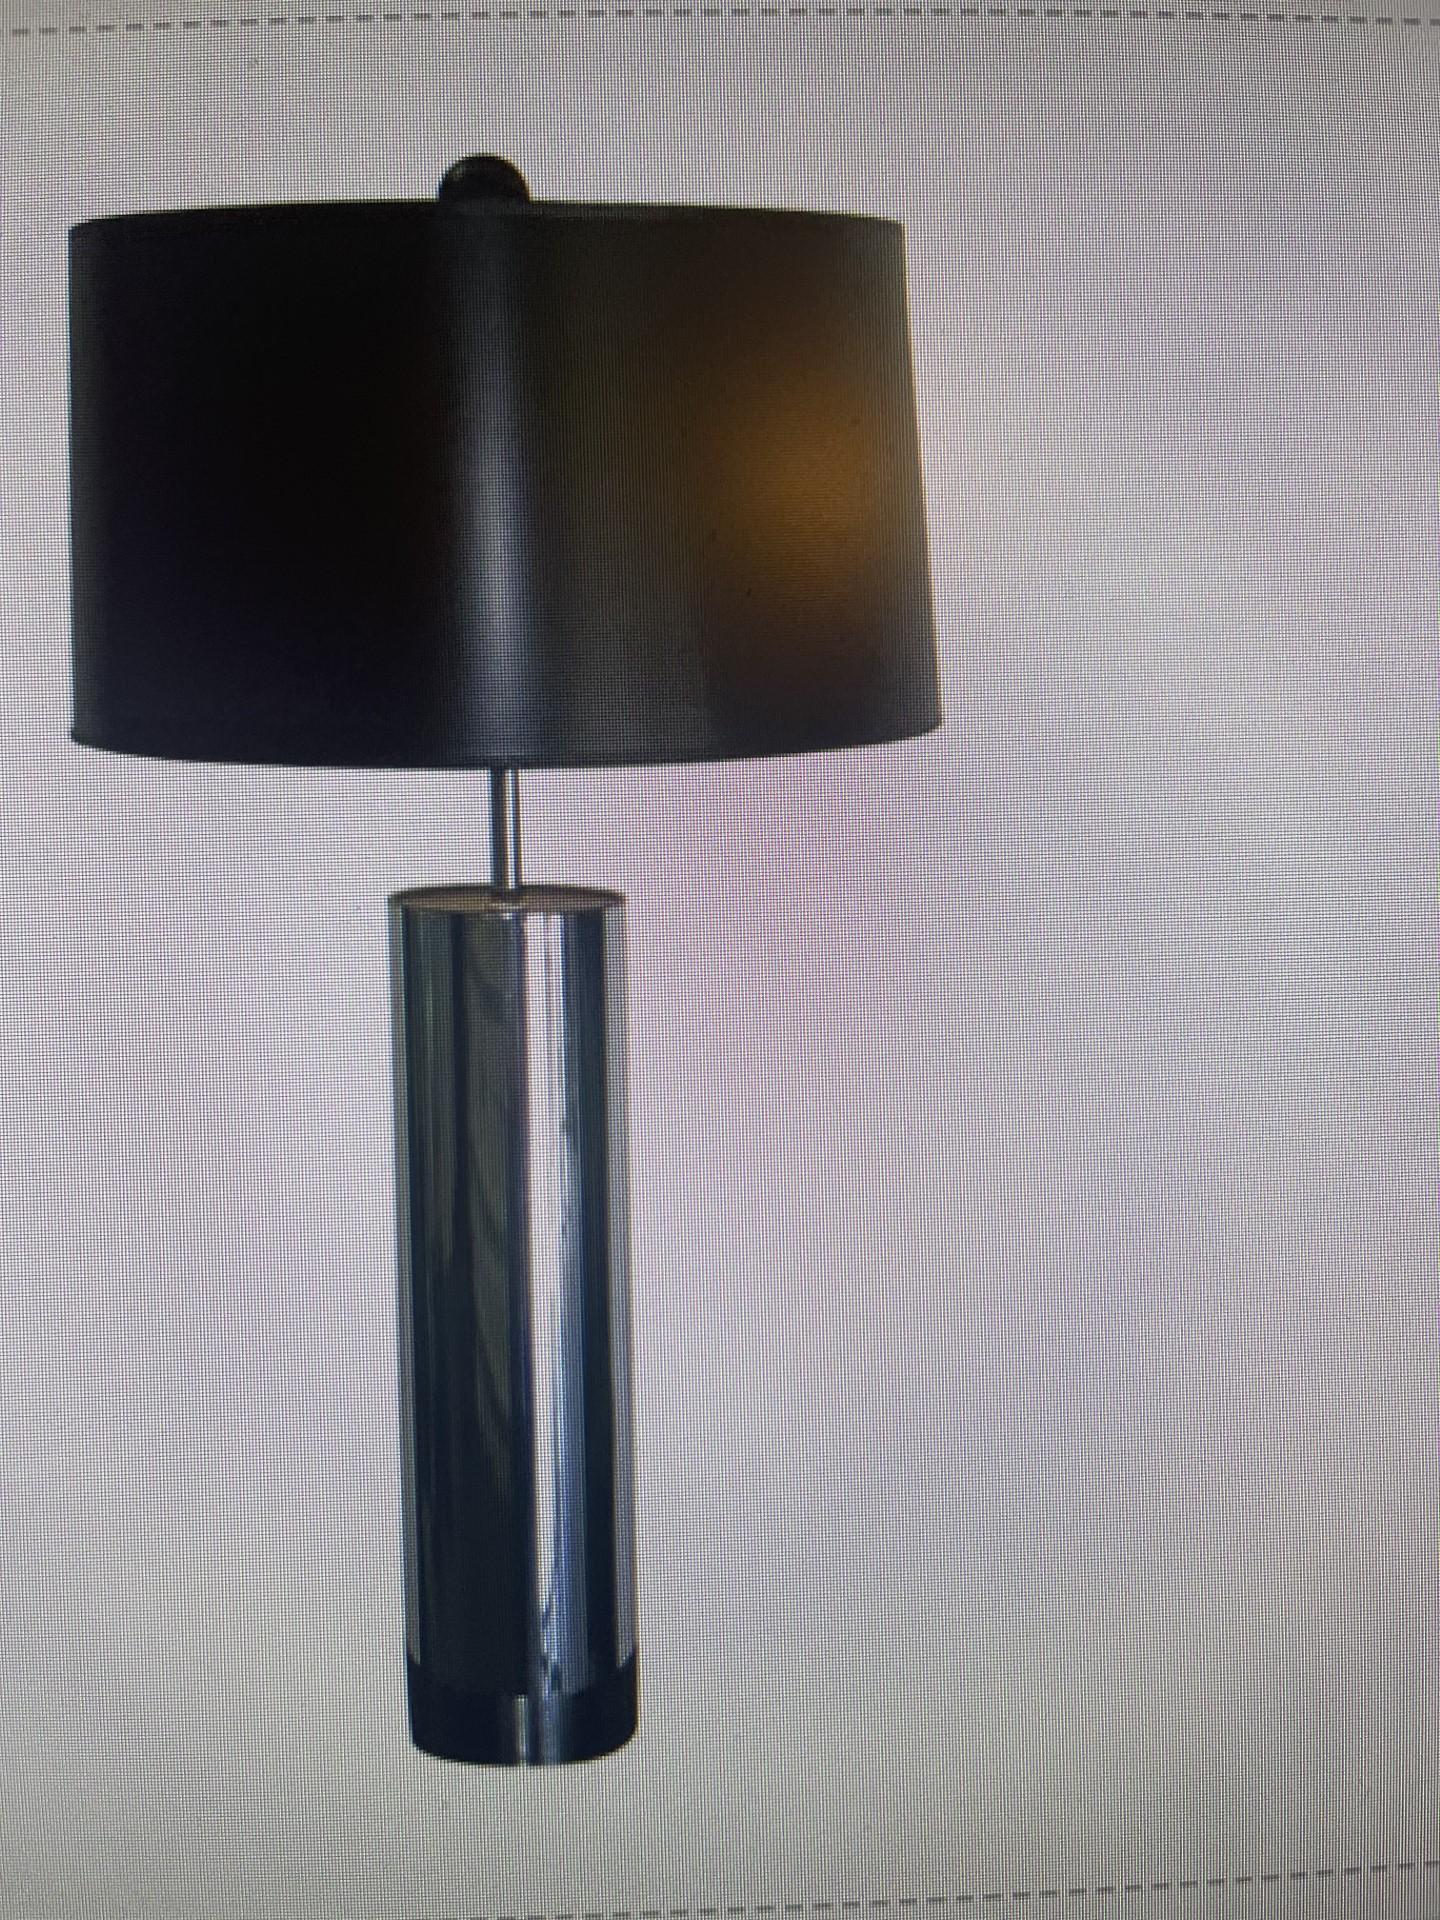 Polished  Chrome Cylinder Lamp 1980s A Trend returning. For Sale